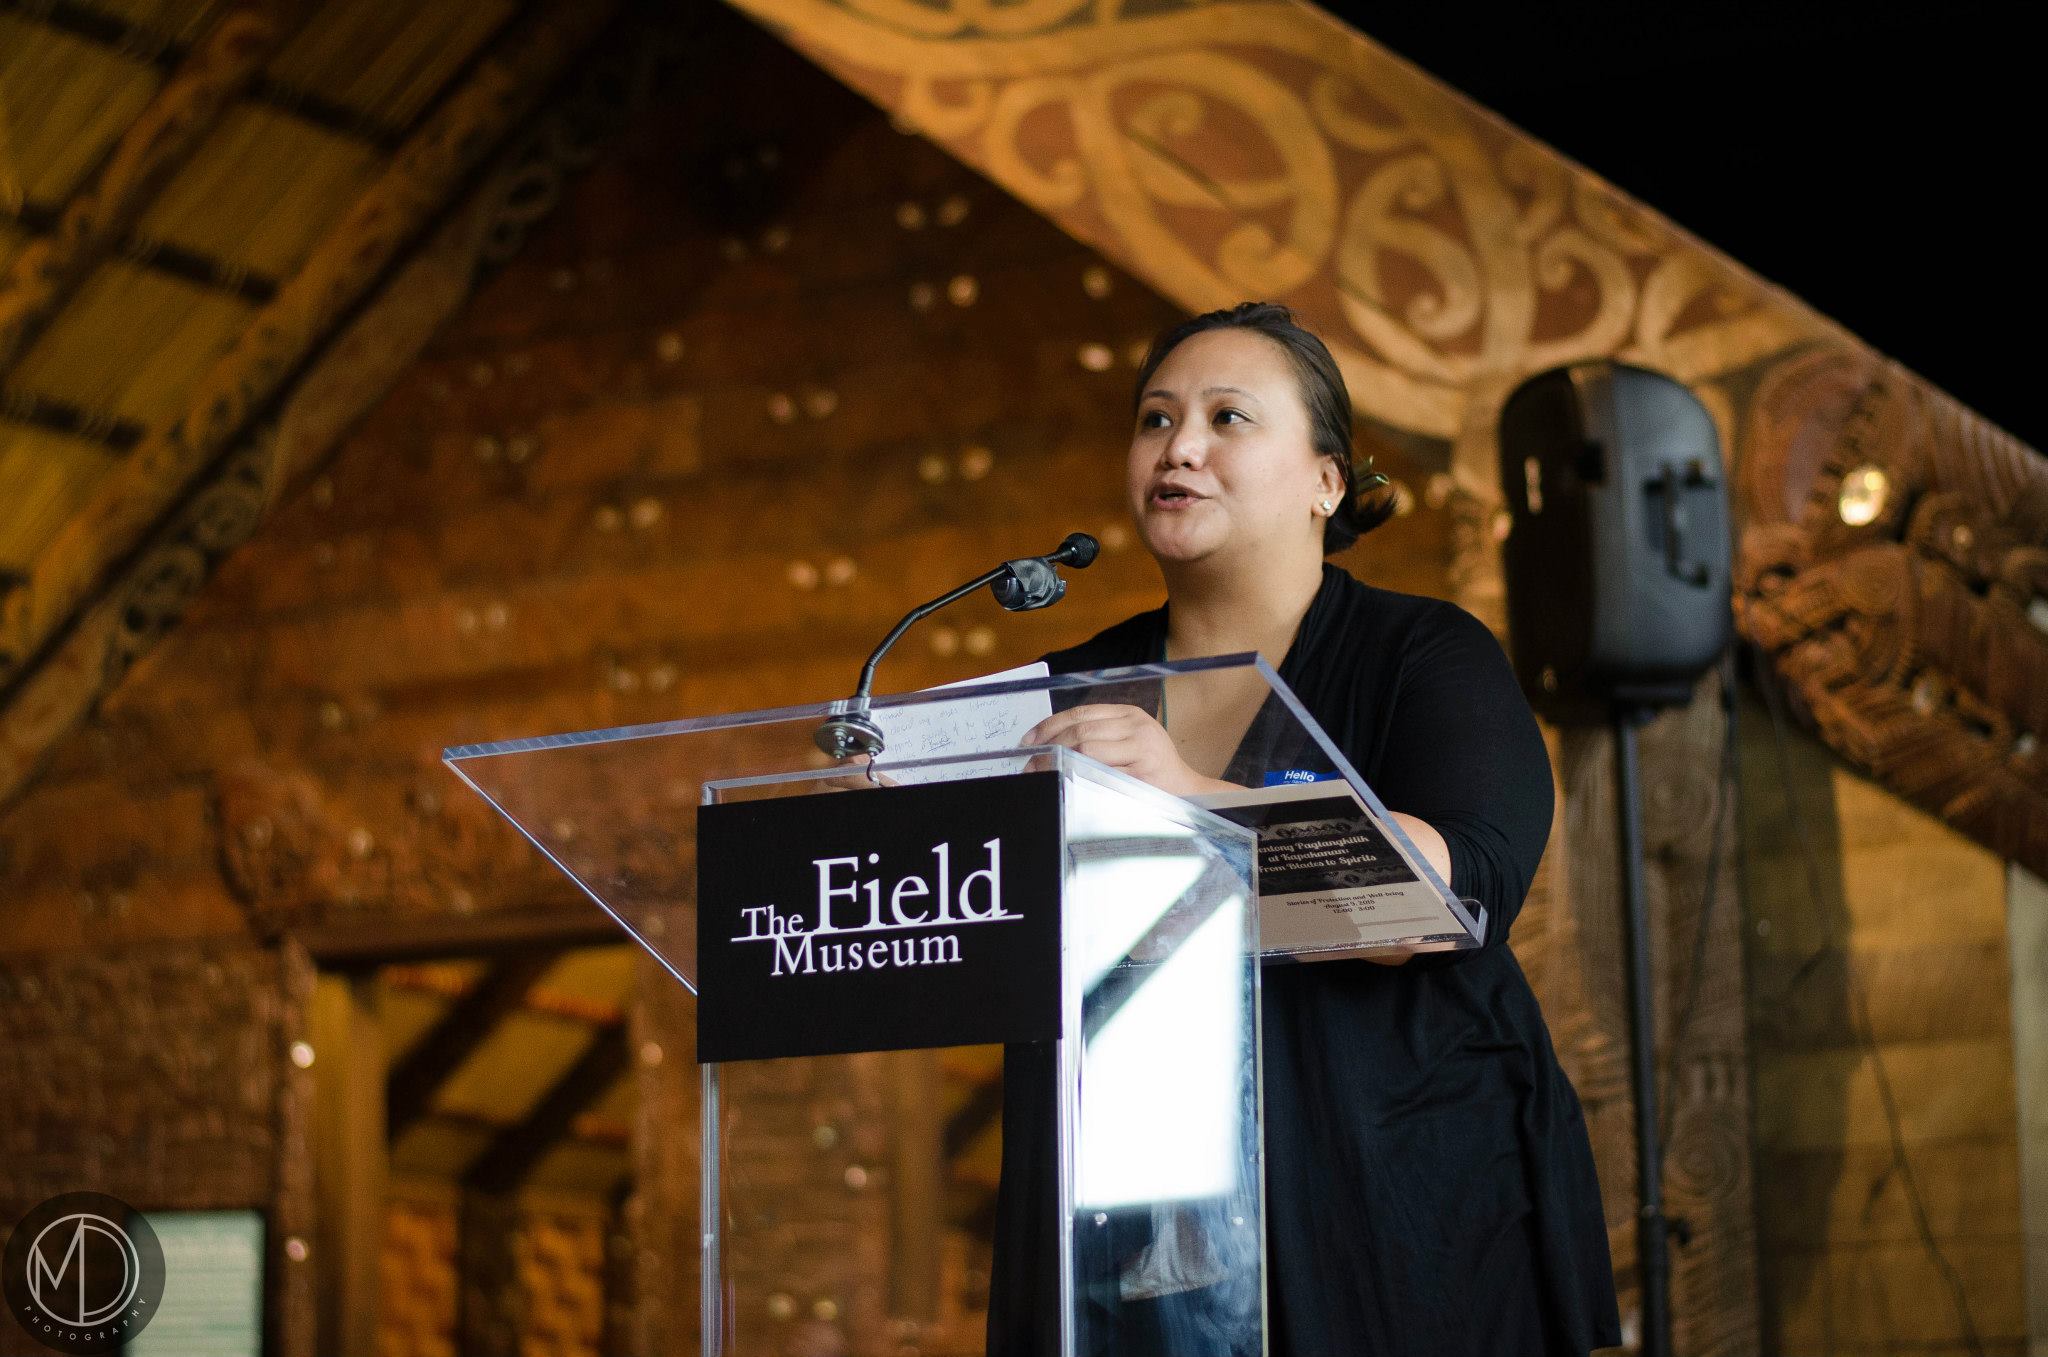 Carollyn addressing the attendees. (c) Field Museum of Natural History - CC BY-NC 4.0